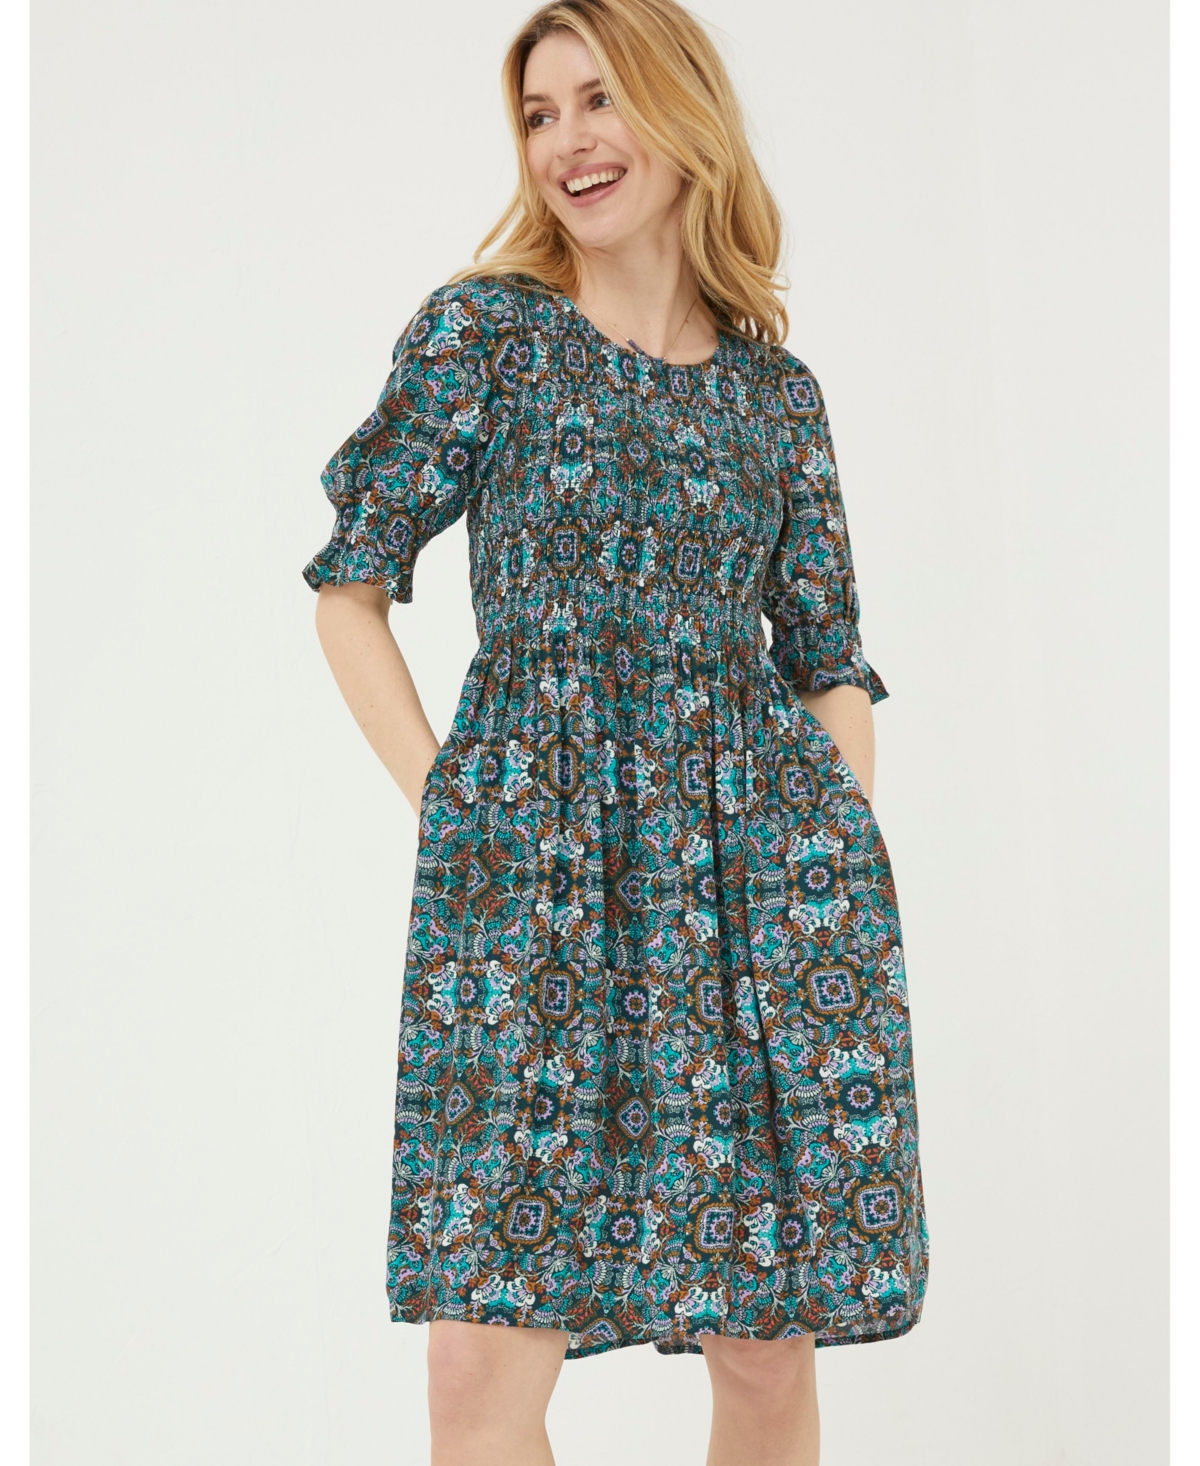 Women's Pacey Mirrored Floral Dress - Teal green